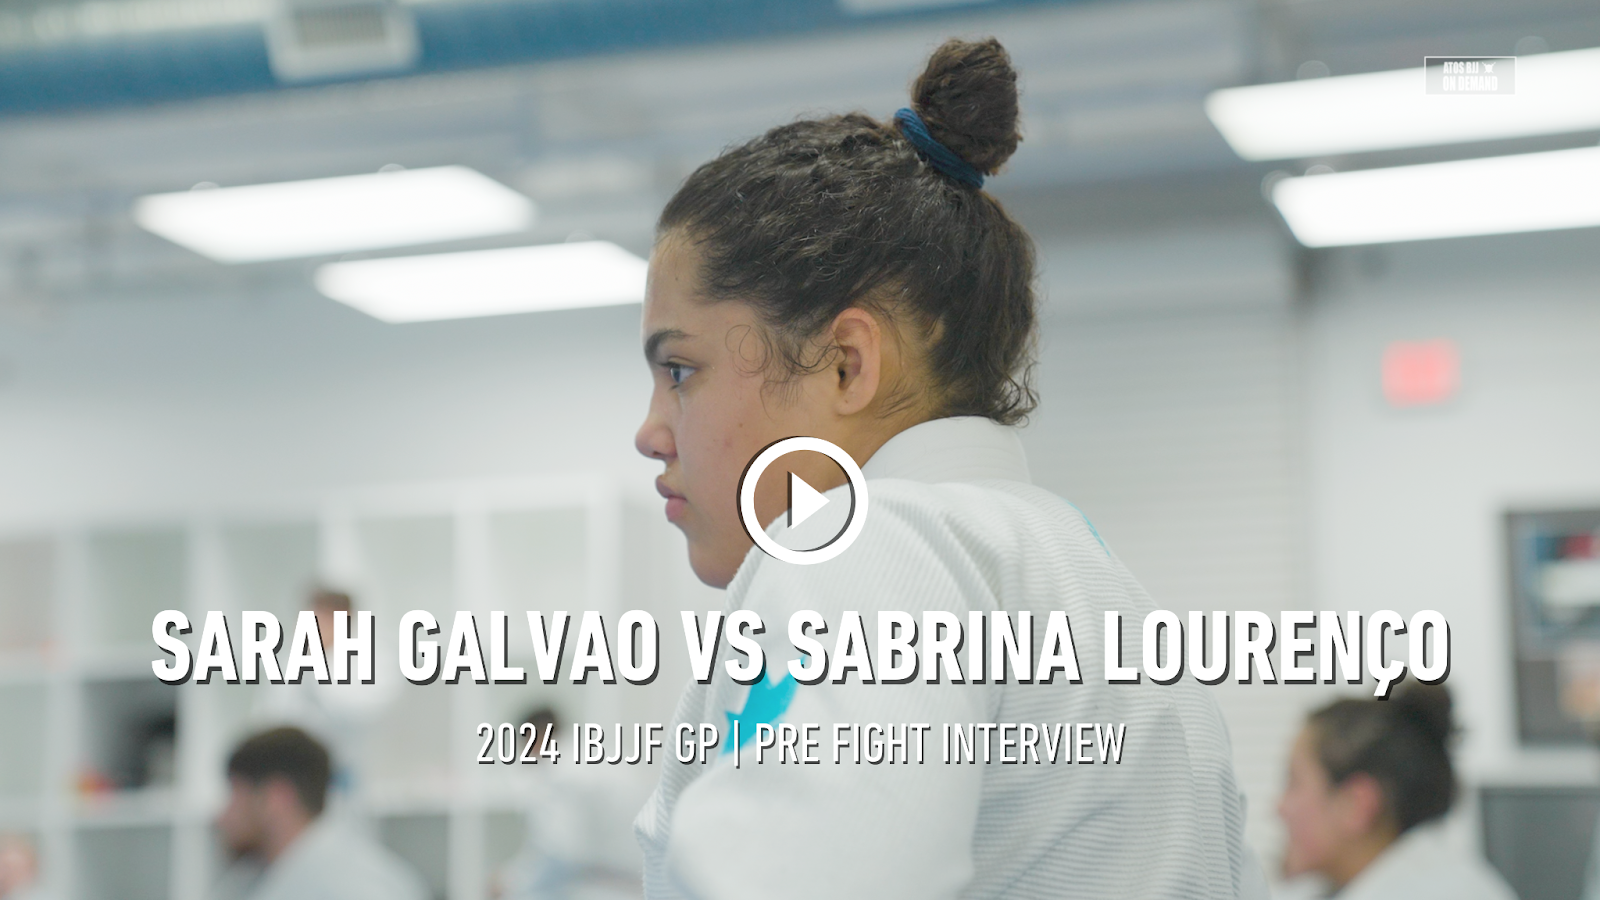 Pre-fight Interview with Sarah Galvao